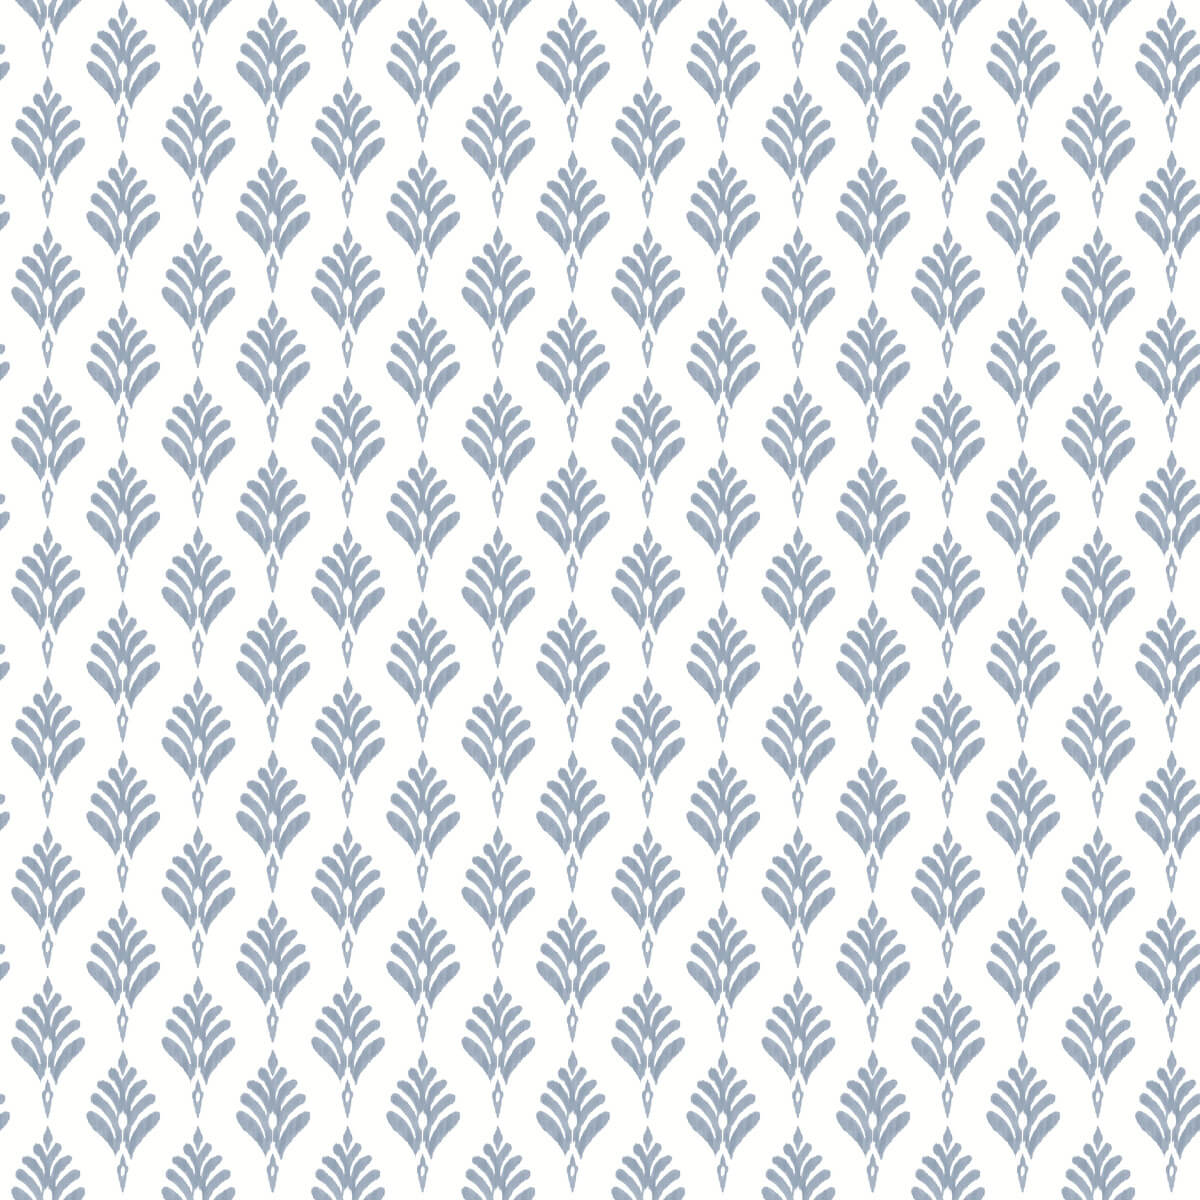 Waters Edge Resource Library French Scallop Wallpaper - SAMPLE